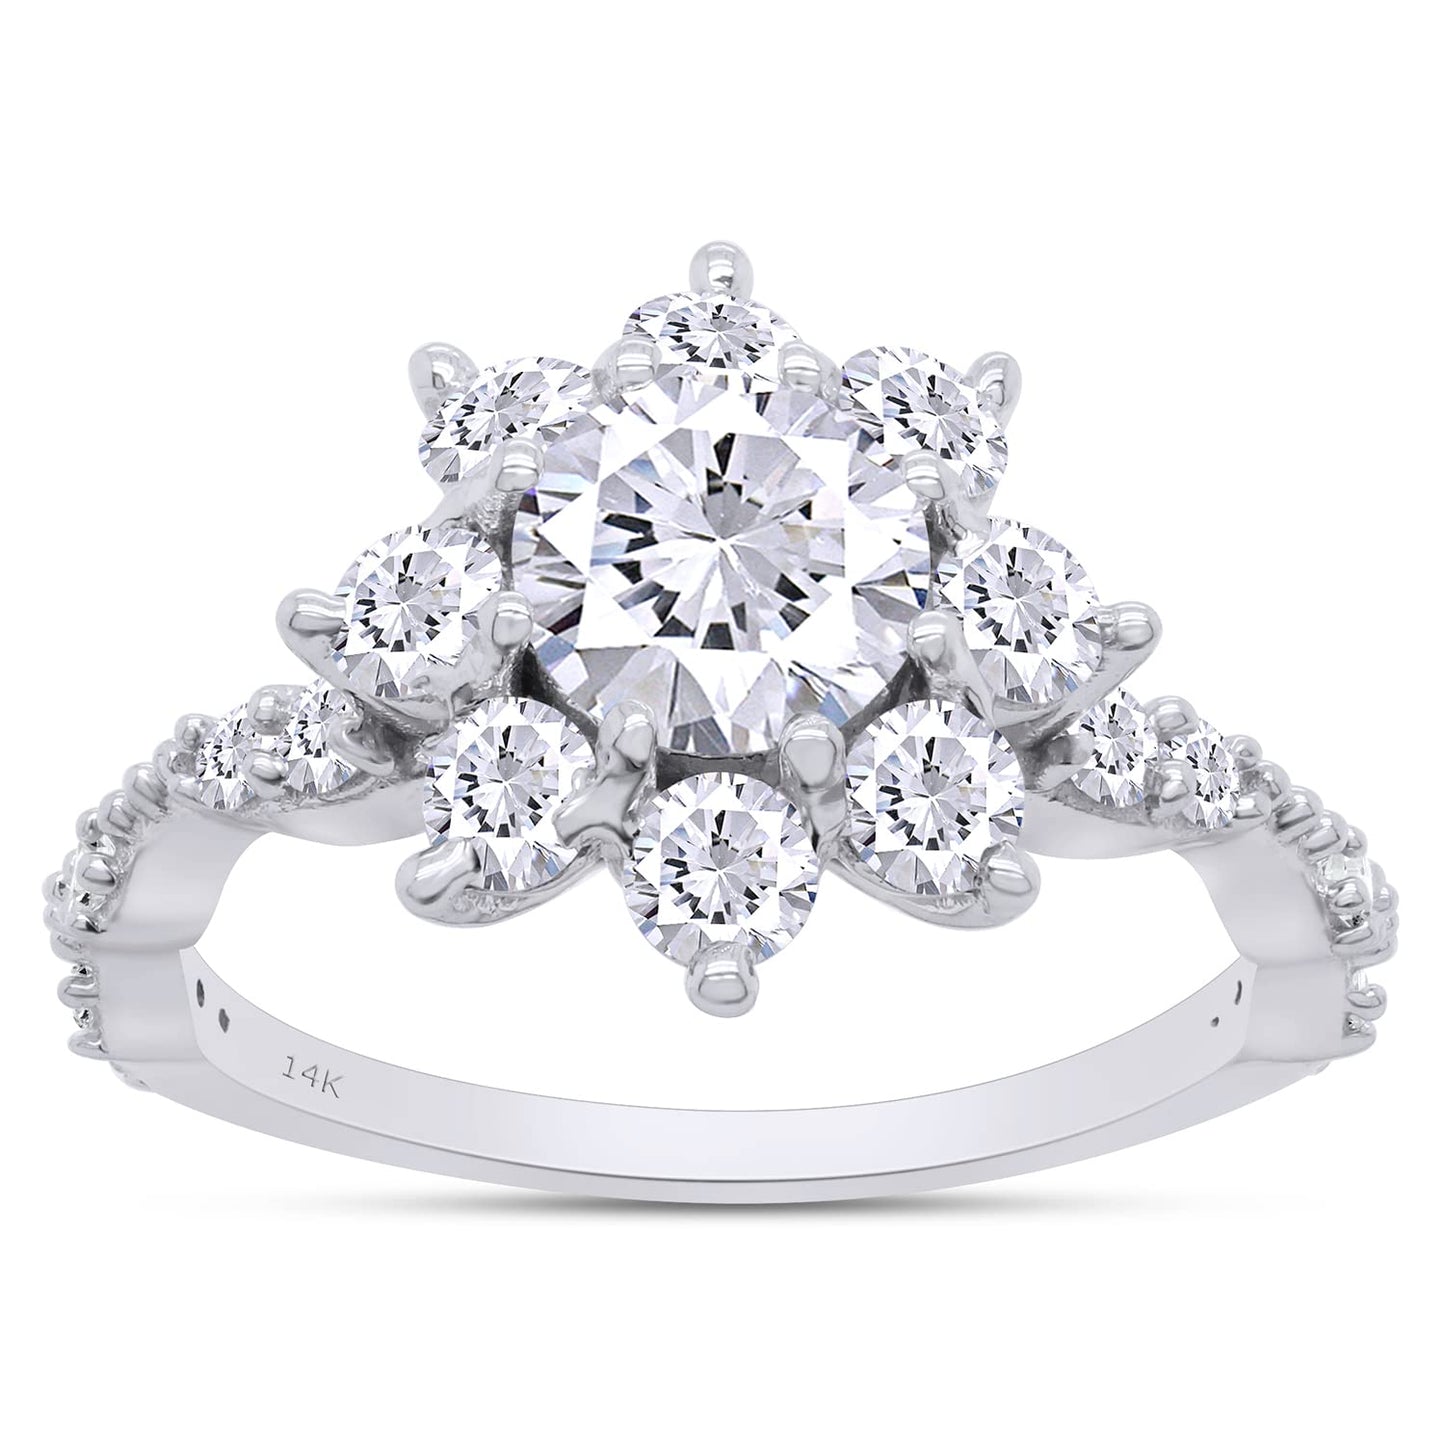 1 2/3 ct. t.w 6.5MM Round Cut Lab Created Moissanite Diamond Halo Flower Wedding Engagement Ring for Women in 10K or 14K Solid Gold (1.65 Cttw)